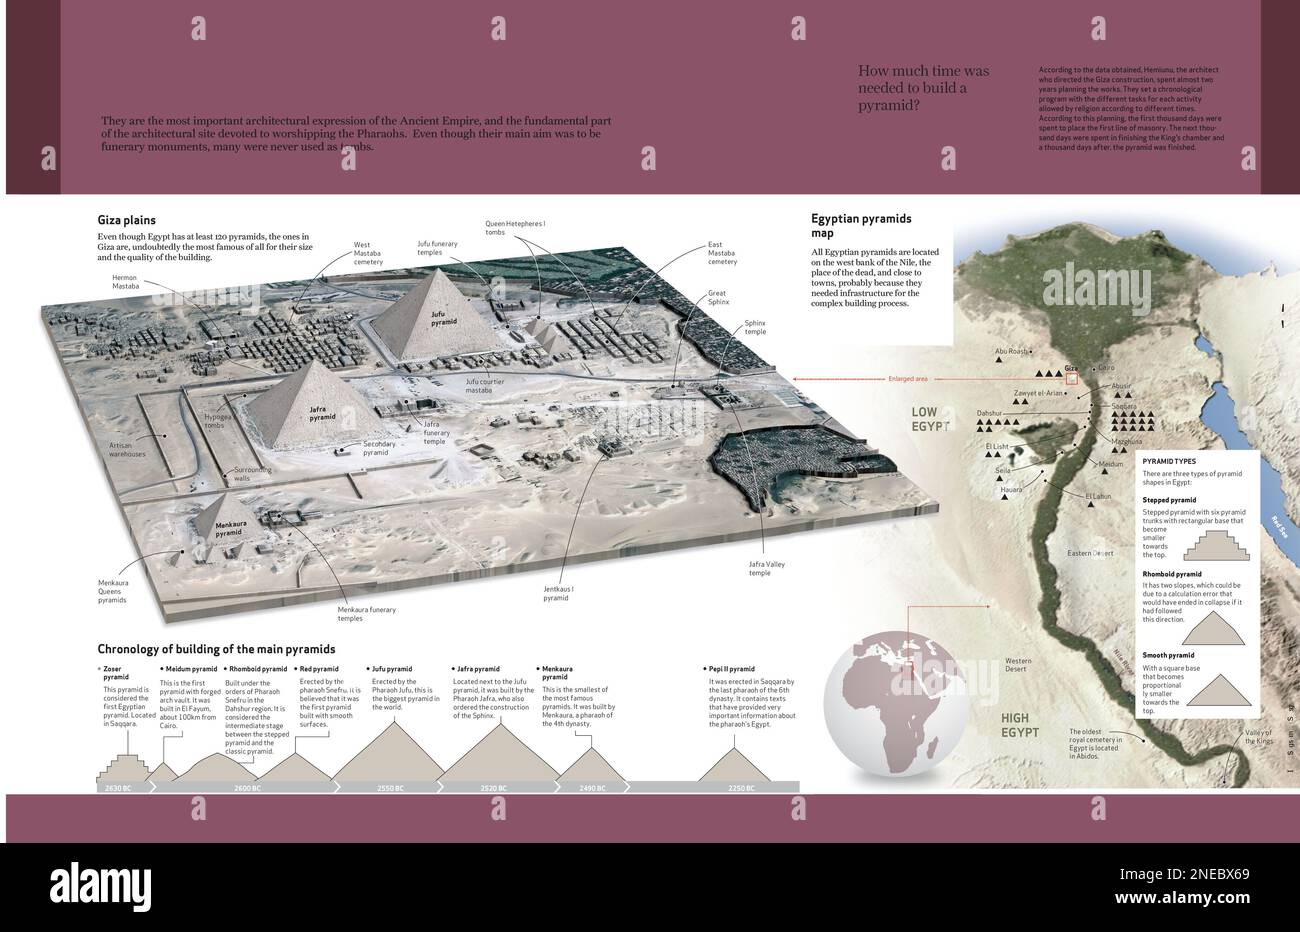 Computer graphics about the location of the Egyptian pyramids in the plains of Giza and their building chronology. [QuarkXPress (.qxp); 4960x3188]. Stock Photo